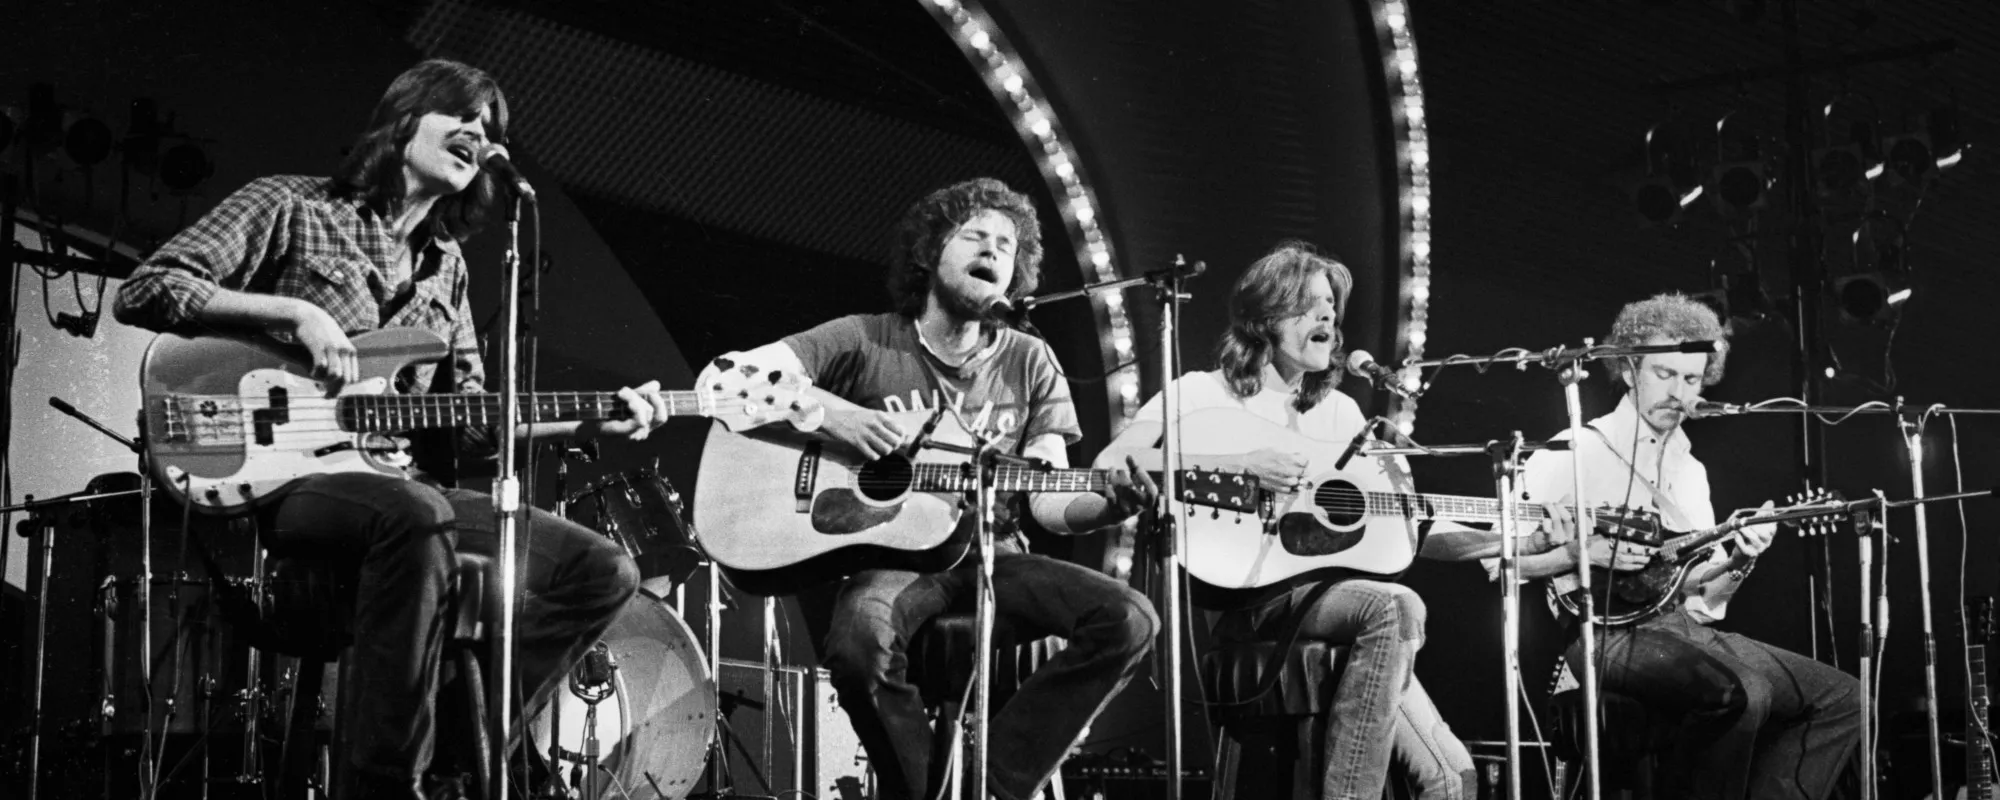 5 Best Eagles Songs from the 1970s